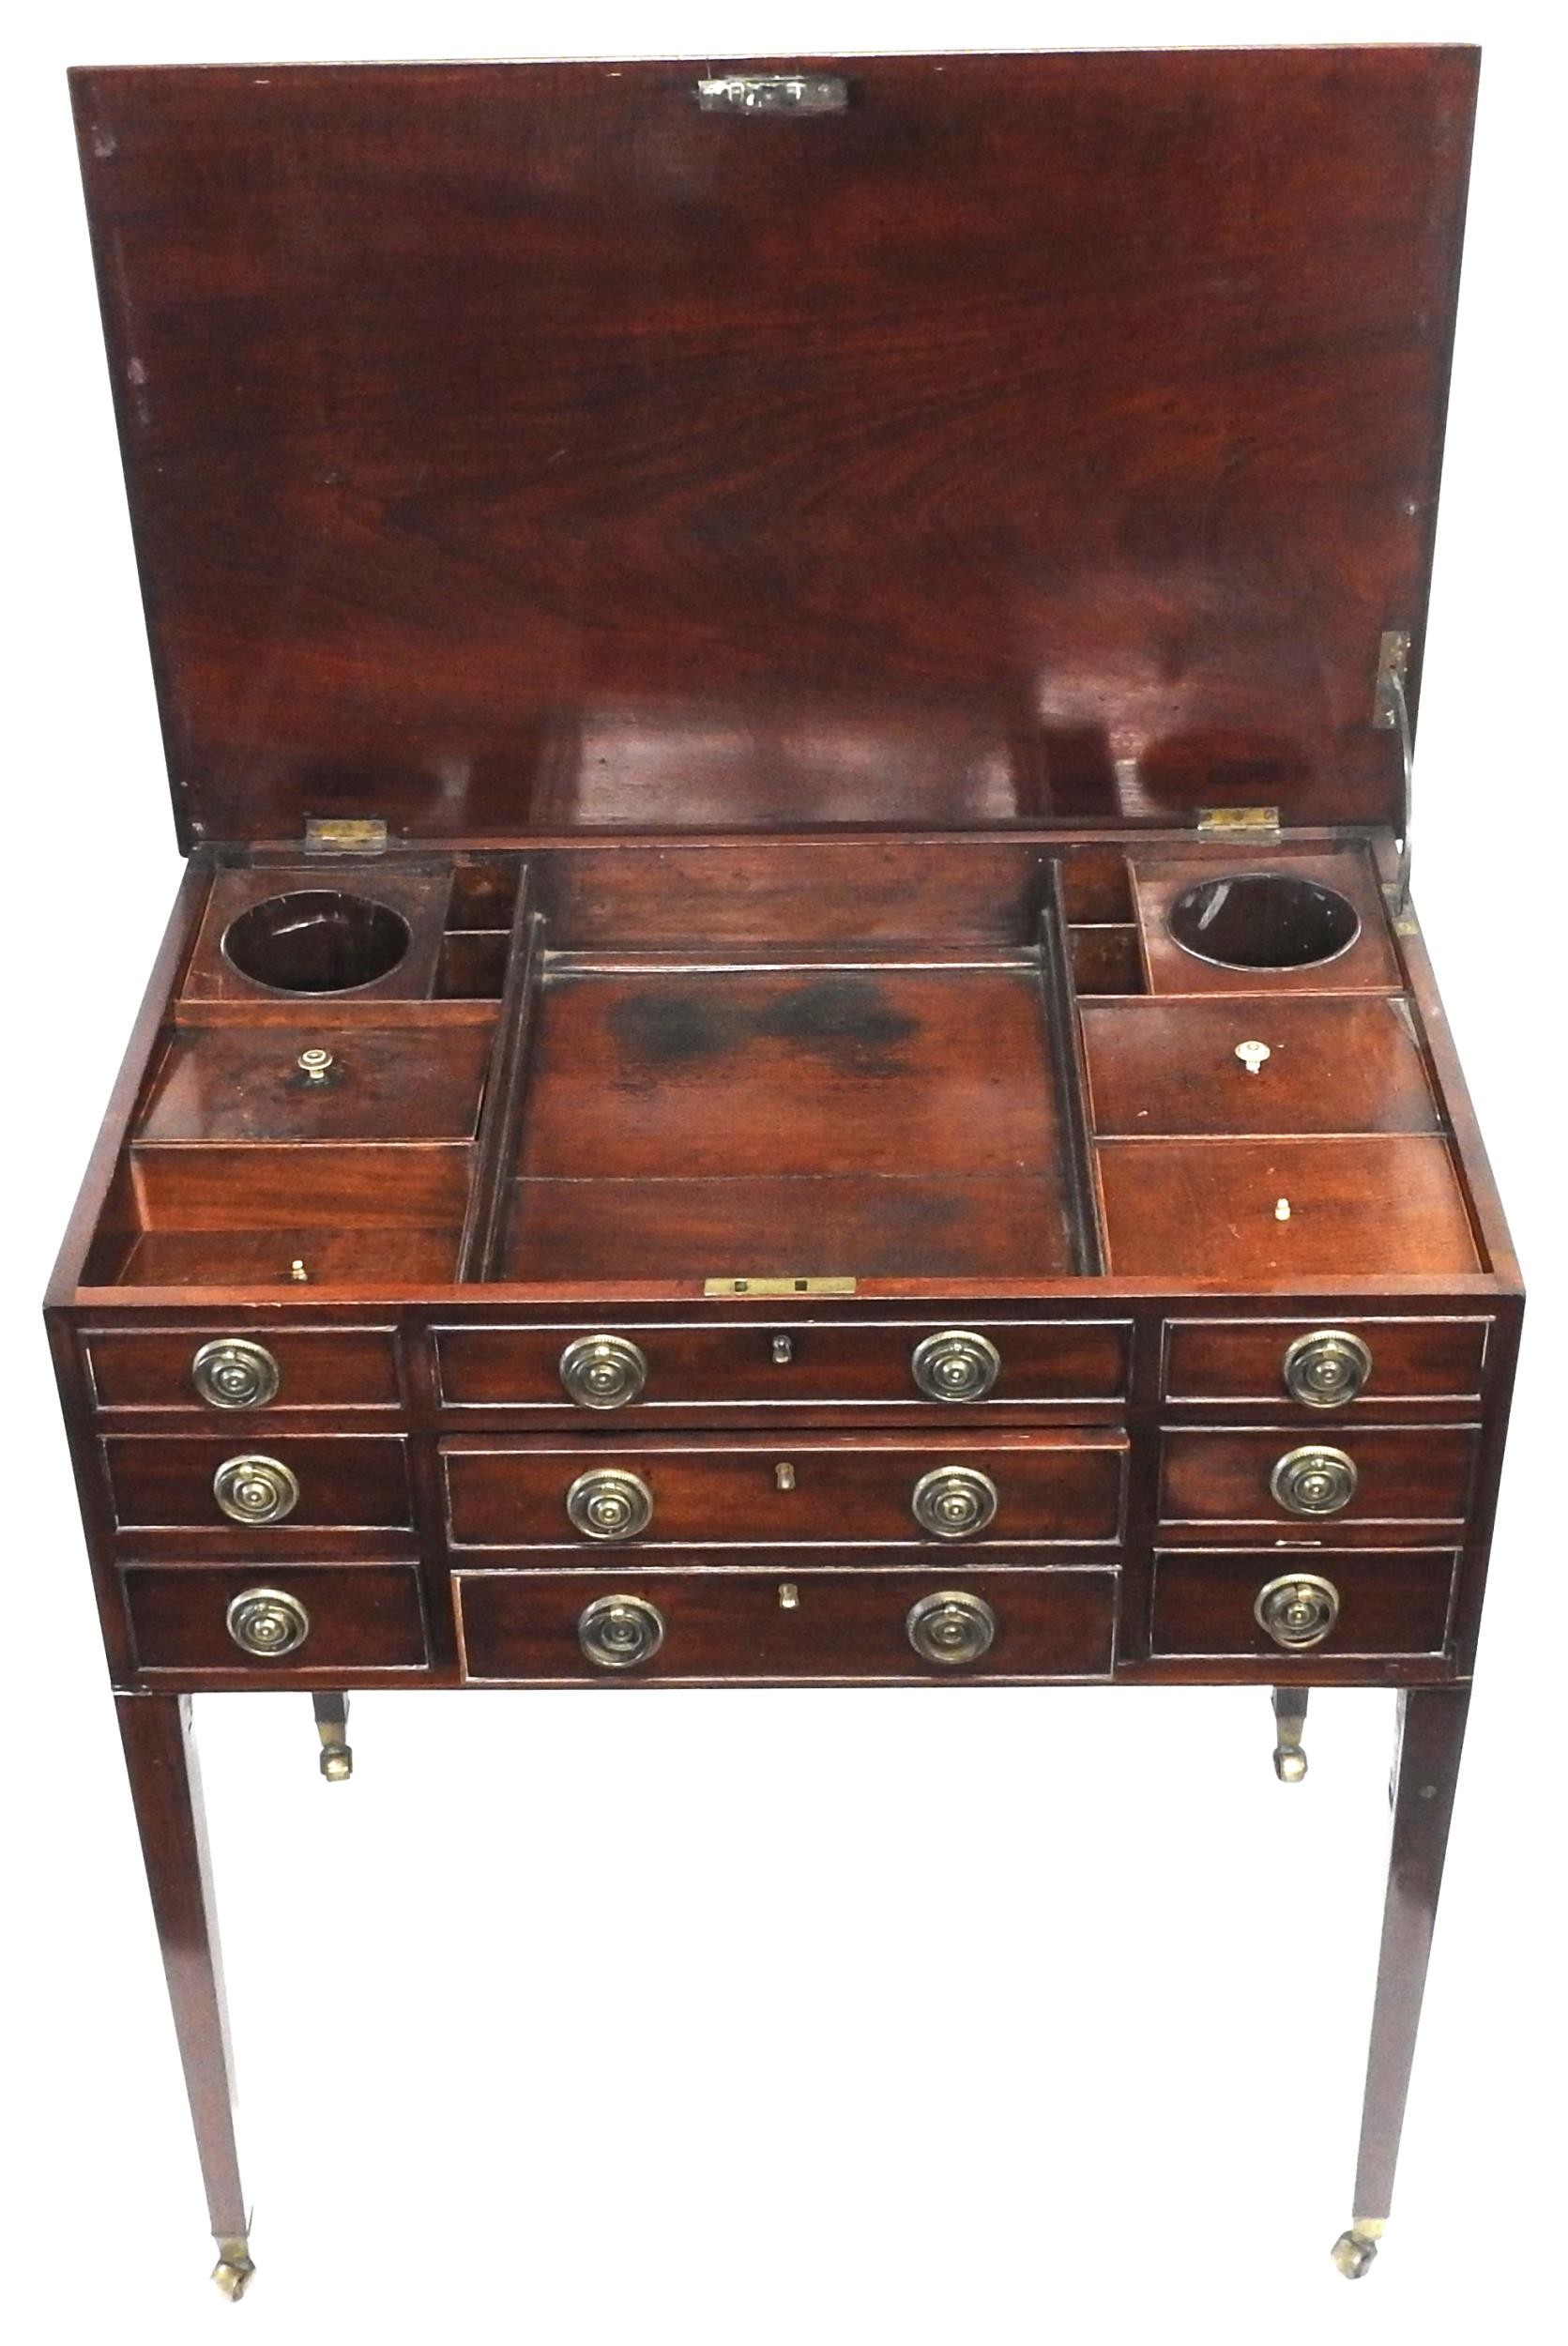 A LATE GEORGIAN MAHOGANY GENTLEMAN'S DRESSING TABLE, the hinged rectangular top opening to reveal an